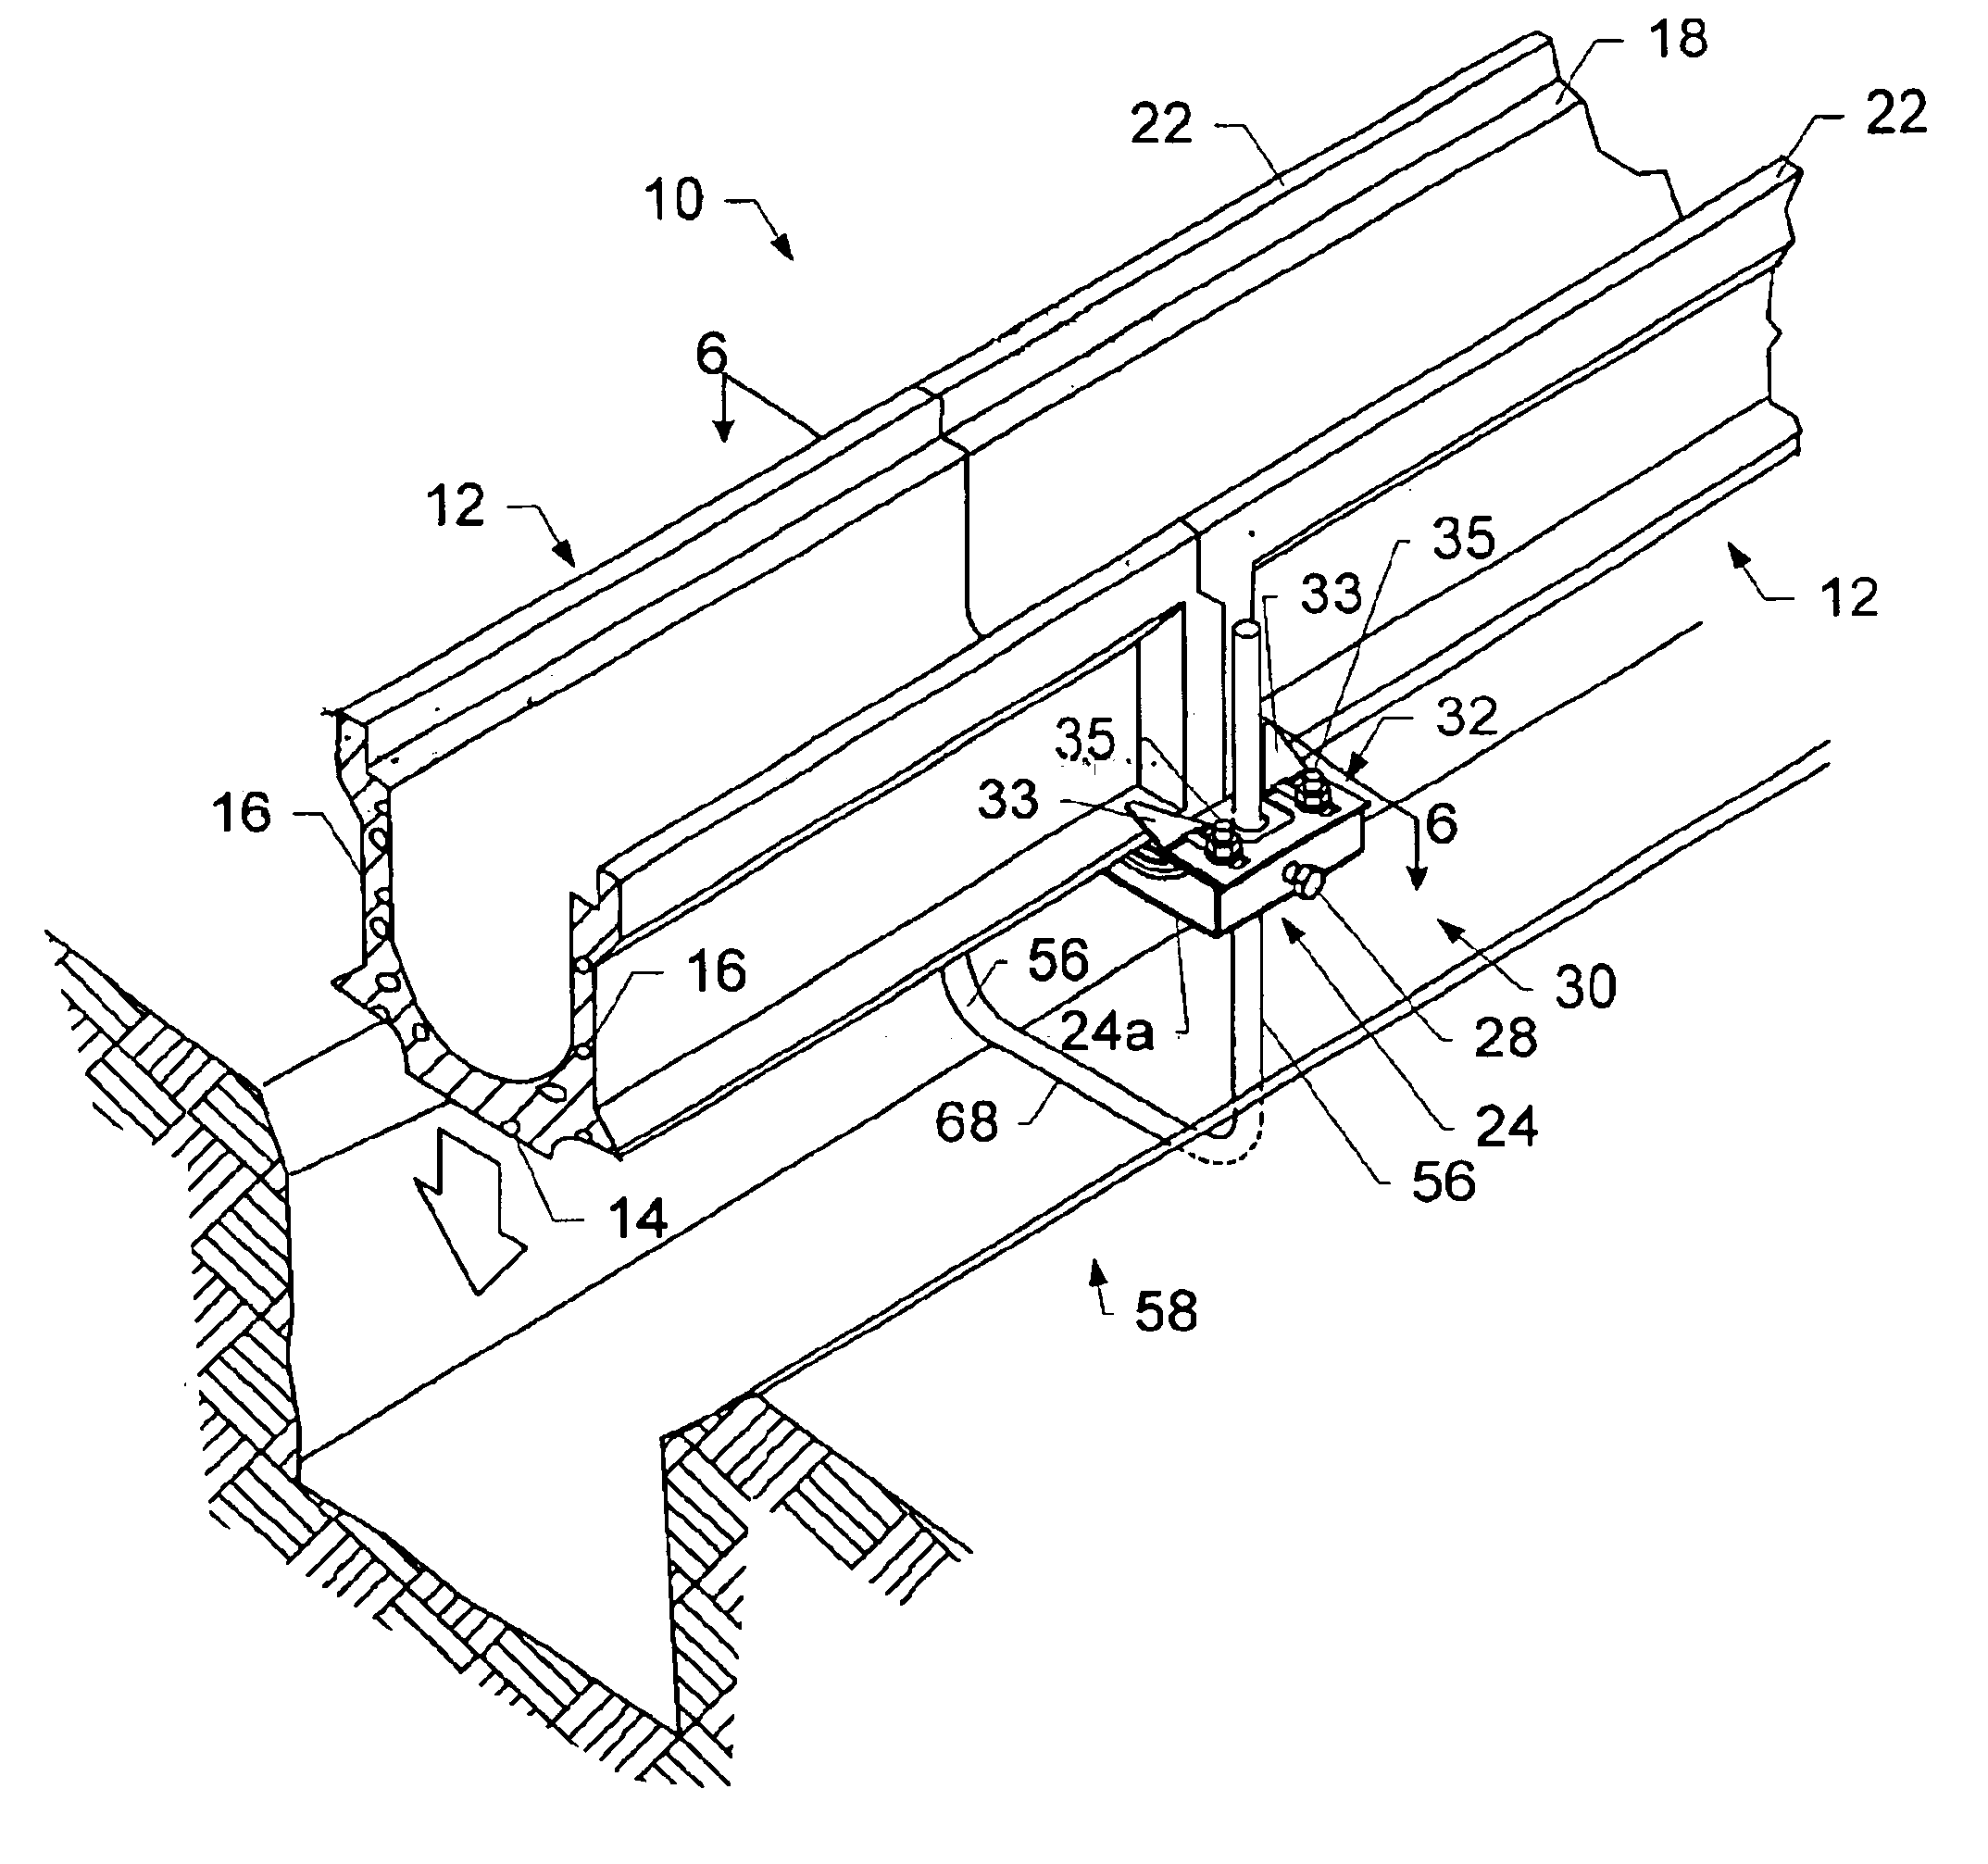 Method and apparatus for aligning channel sections with an adjustable alignment key